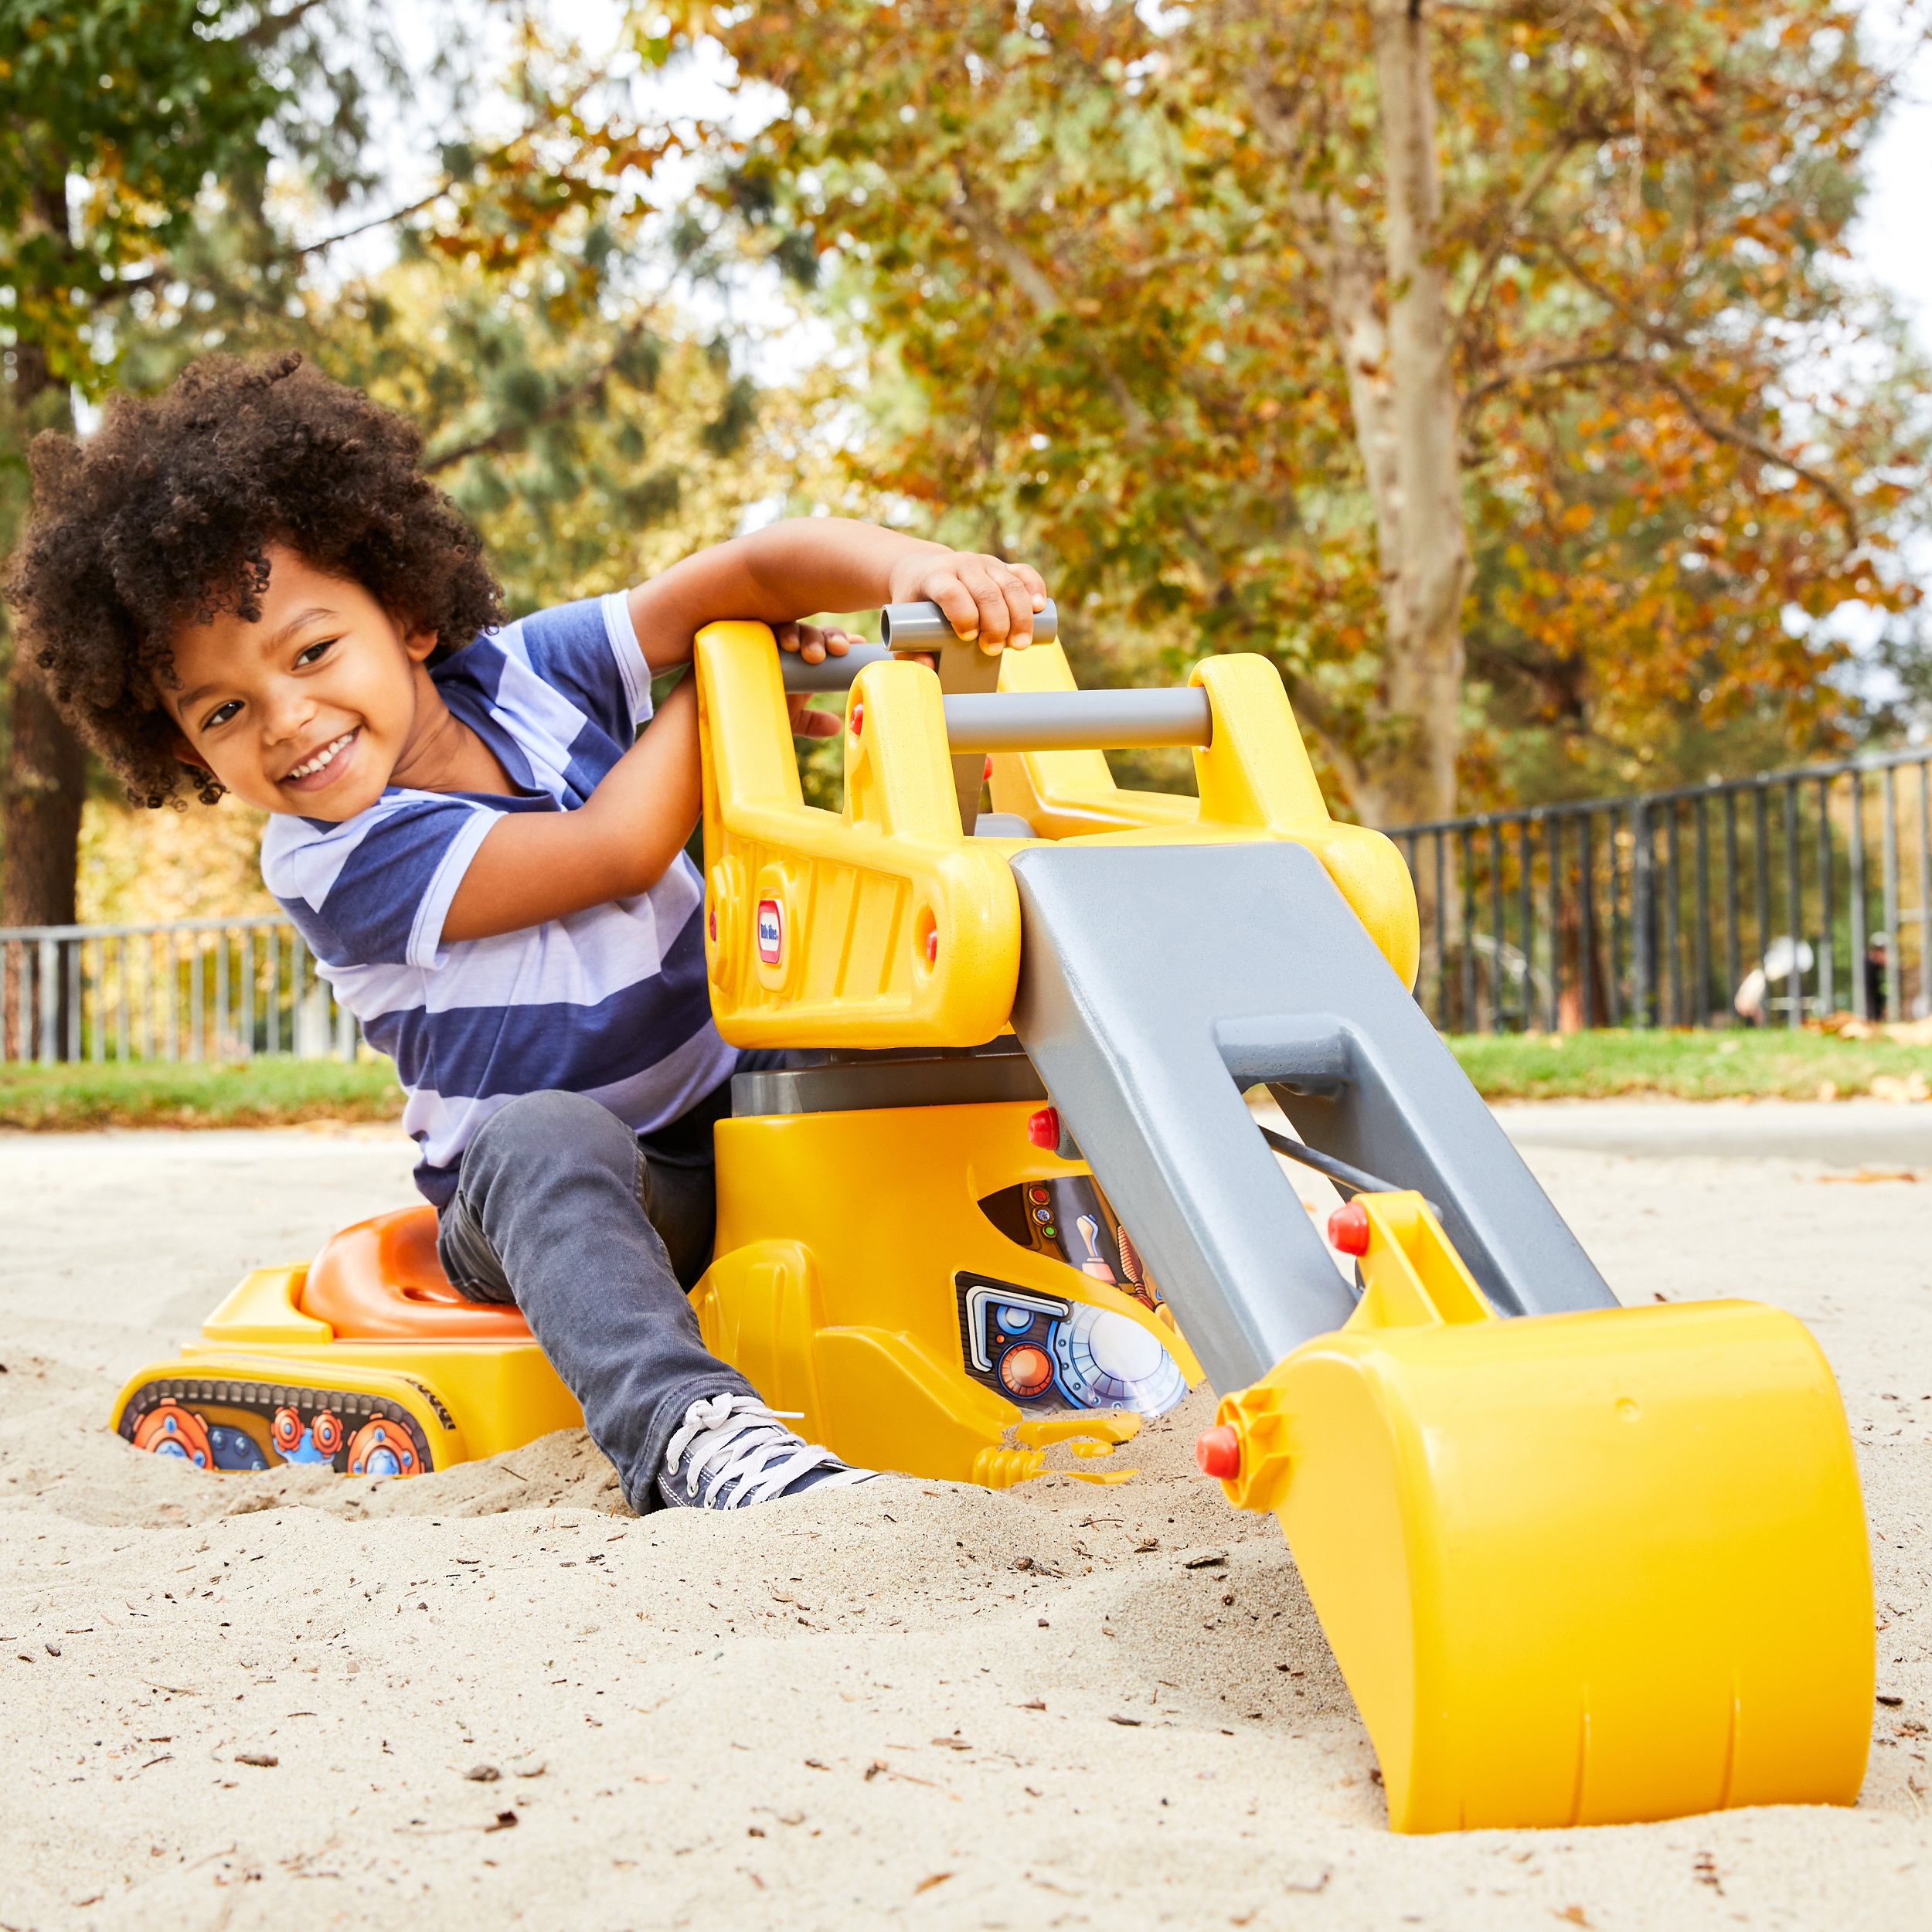 Little Tikes You Drive Sand Toy Excavator with Swivel For Sit and Stand Scoop and Dump Play Set with Kid-Sized Crane, Yellow- Toys For Kids Toddlers Boys Girls Ages 3 4 5+ - image 3 of 7